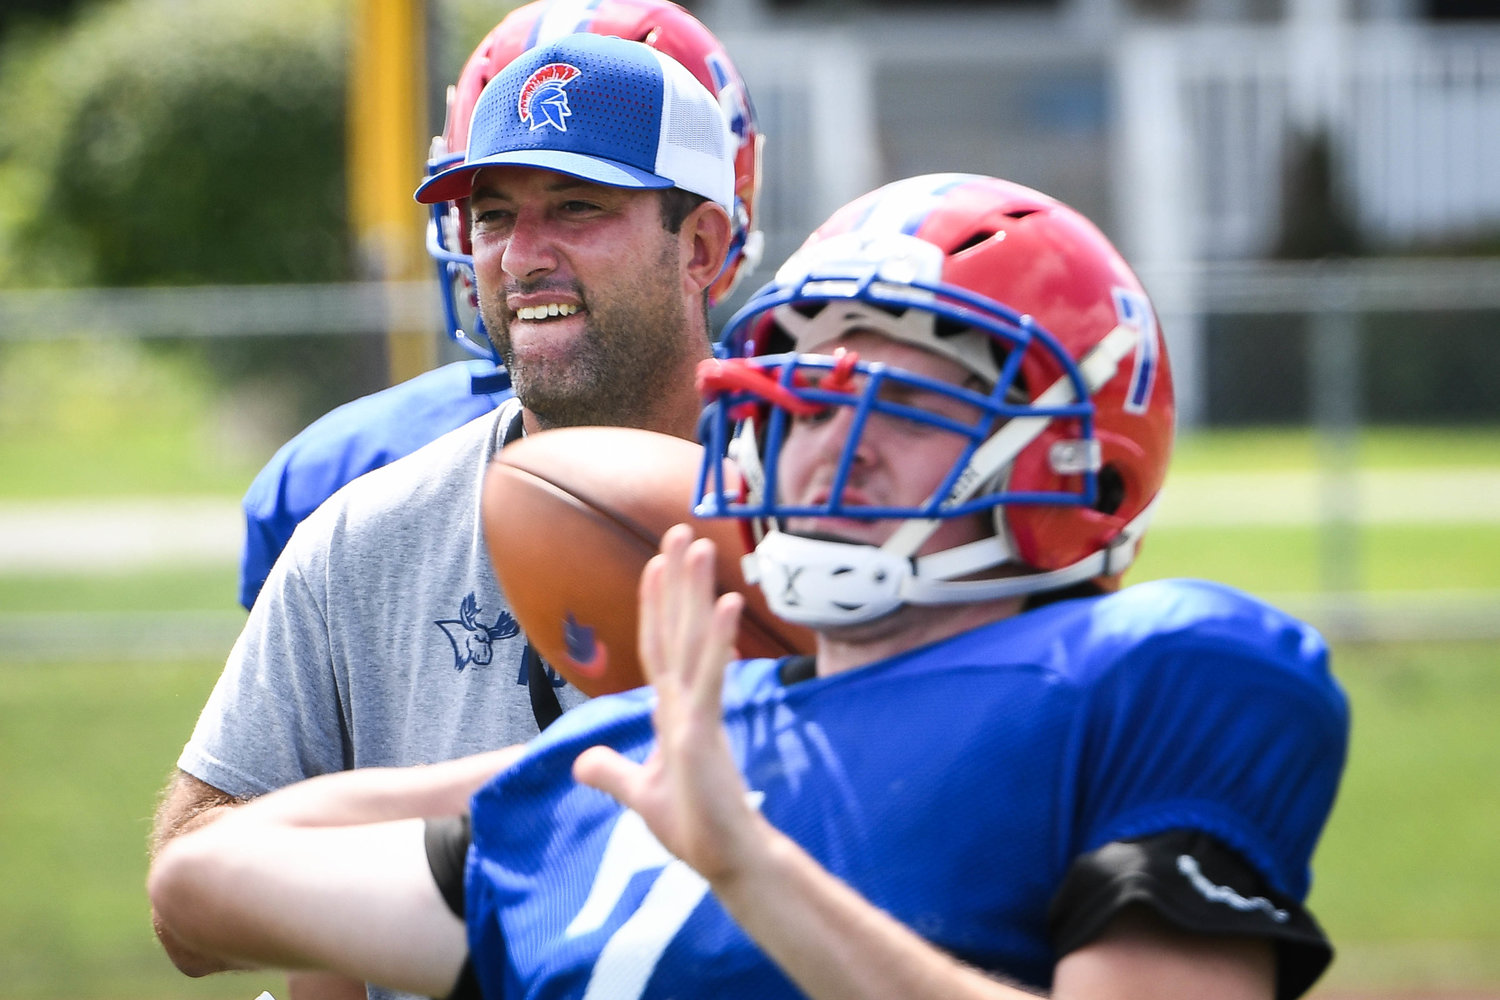 New Hartford head coach Jim Kramer looks on during a practice. The Spartans are 3-1 heading into Friday’s matchup against rival Whitesboro.